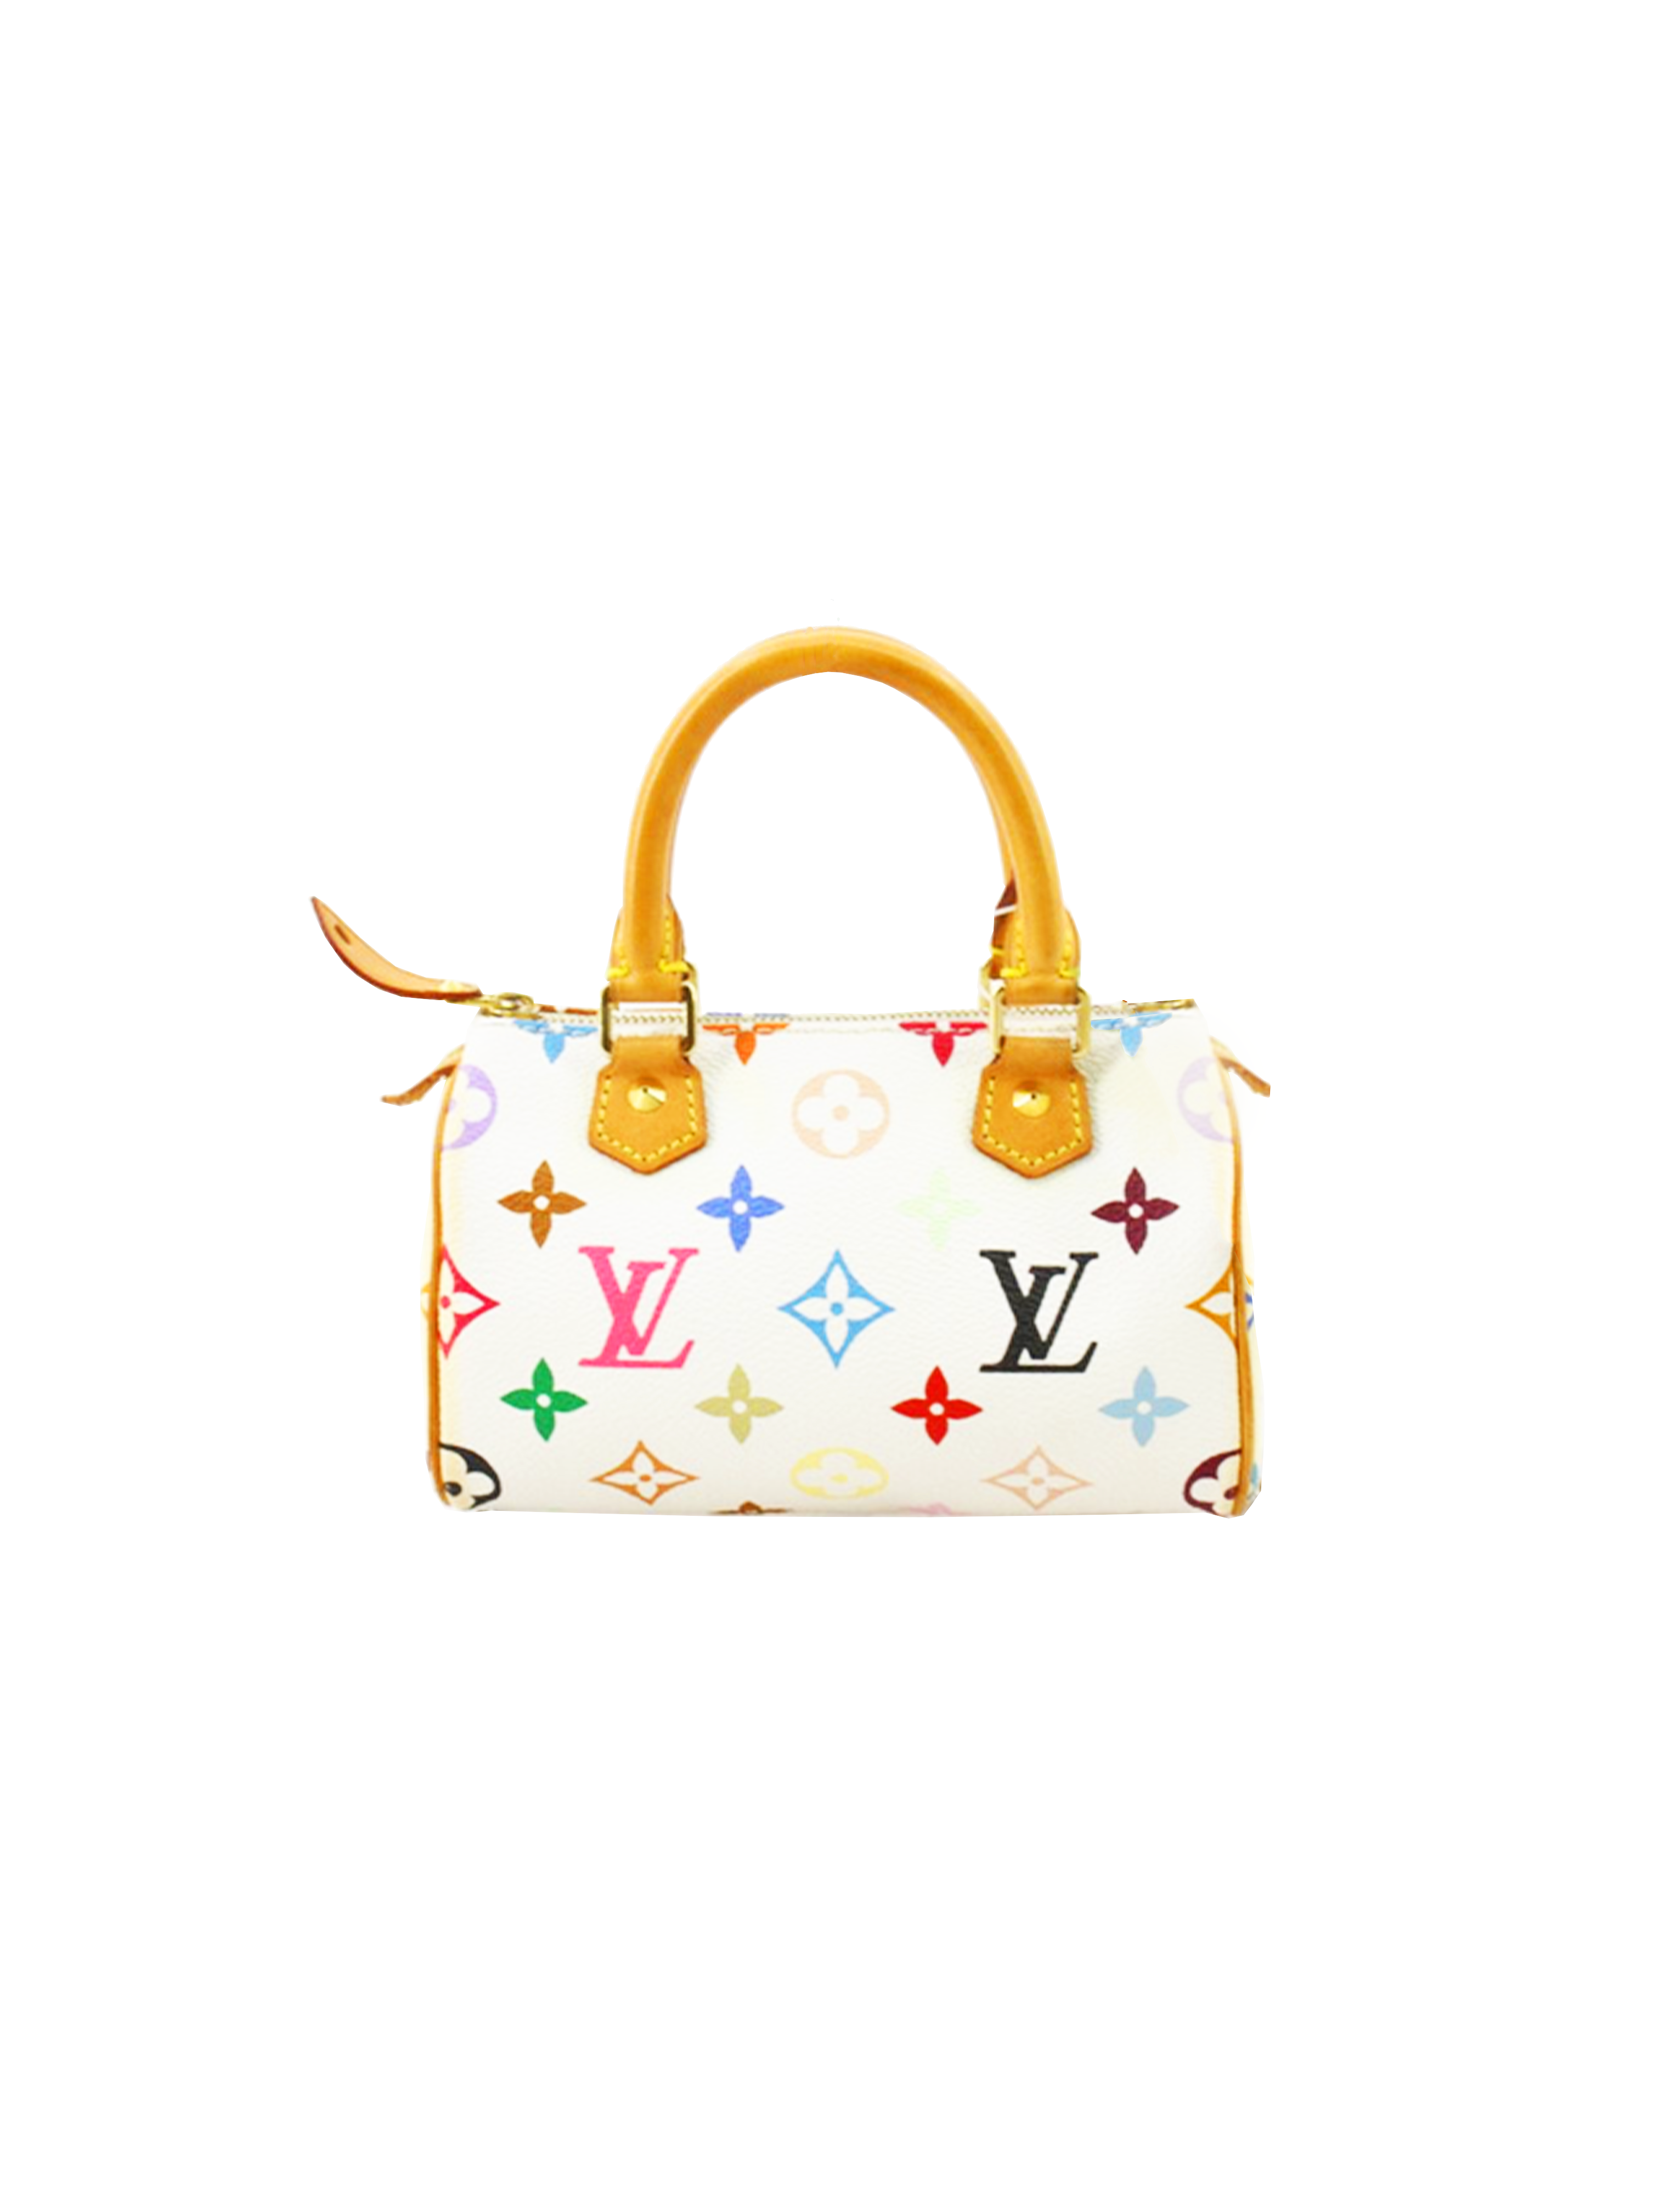 Shop Louis Vuitton NEVERFULL 2022 SS Logo Plain Leather Straw Bags M59963  by NHT.inc